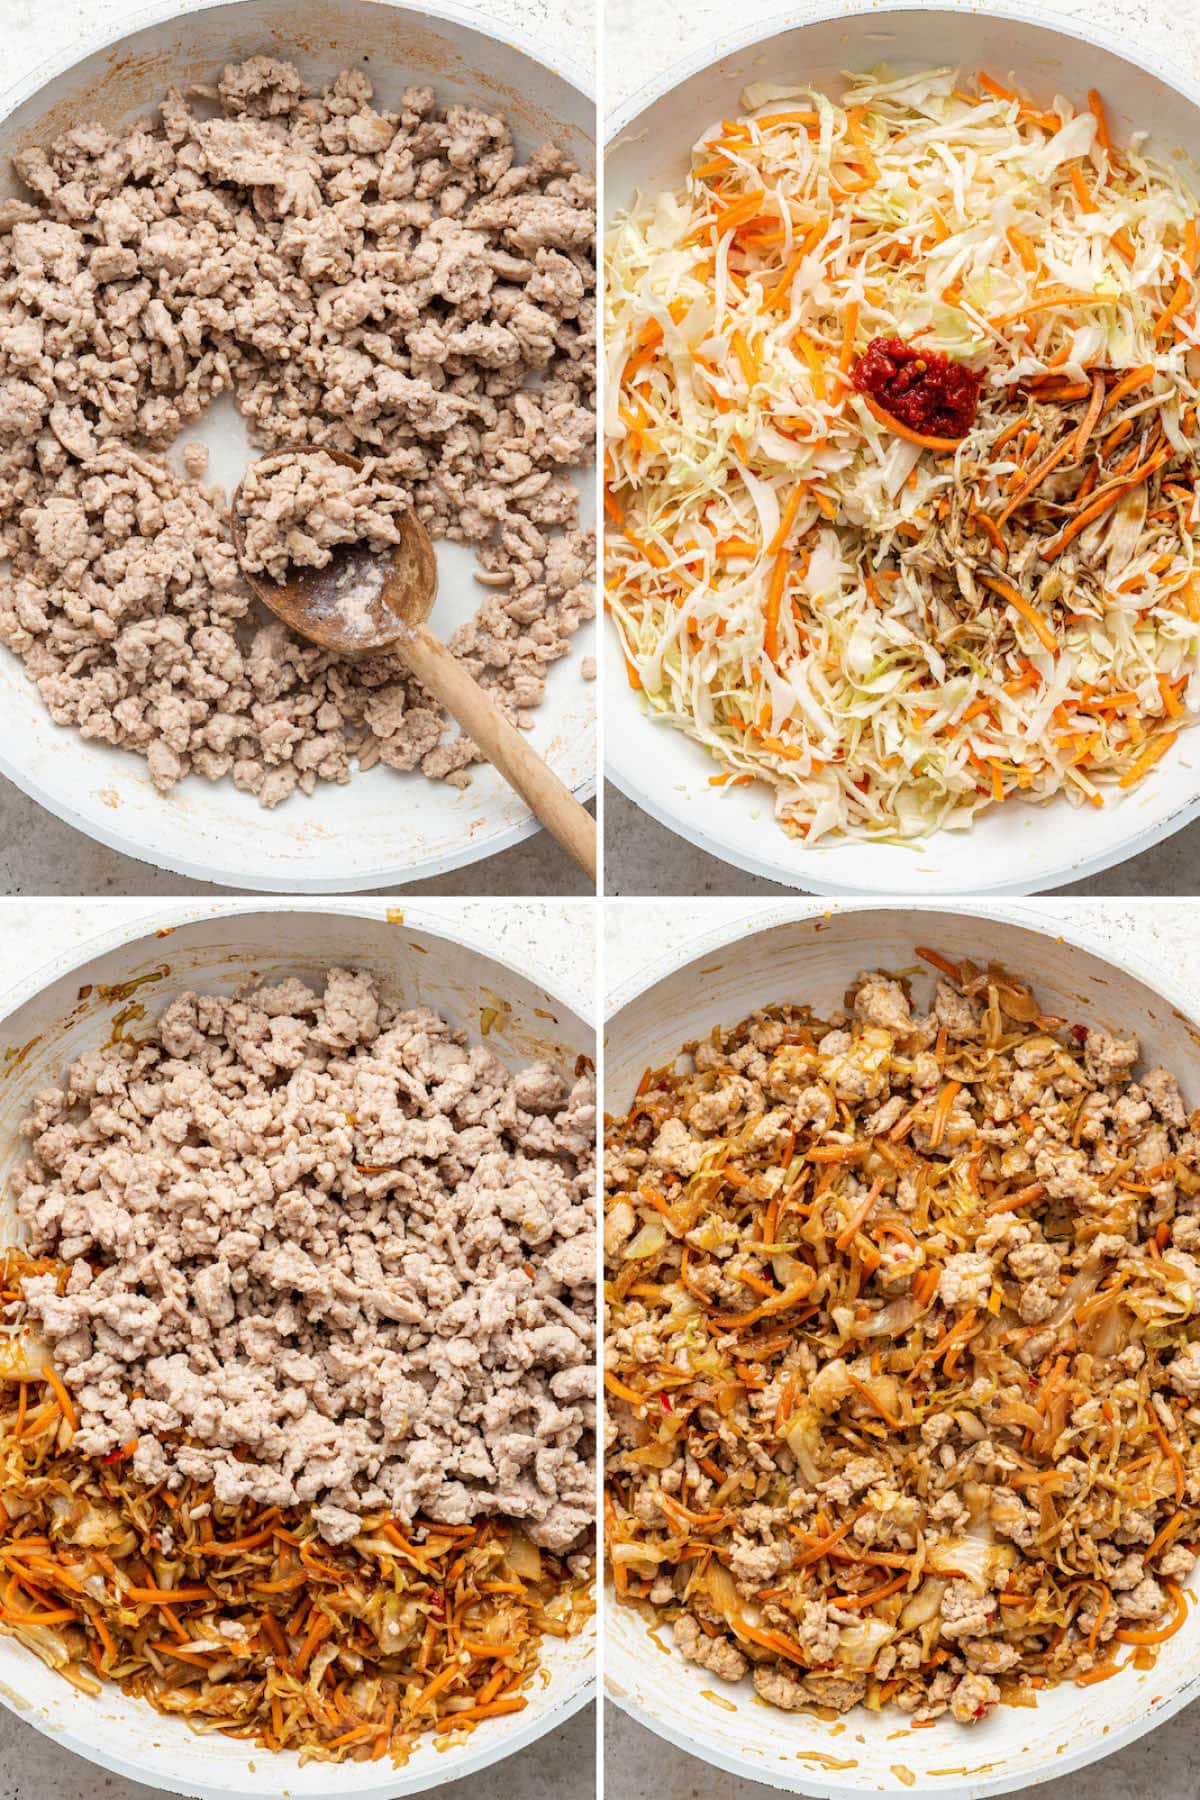 Collage of four photos showing the steps to make Egg Roll in a Bowl, cooking the ground turkey and adding the coleslaw mix.